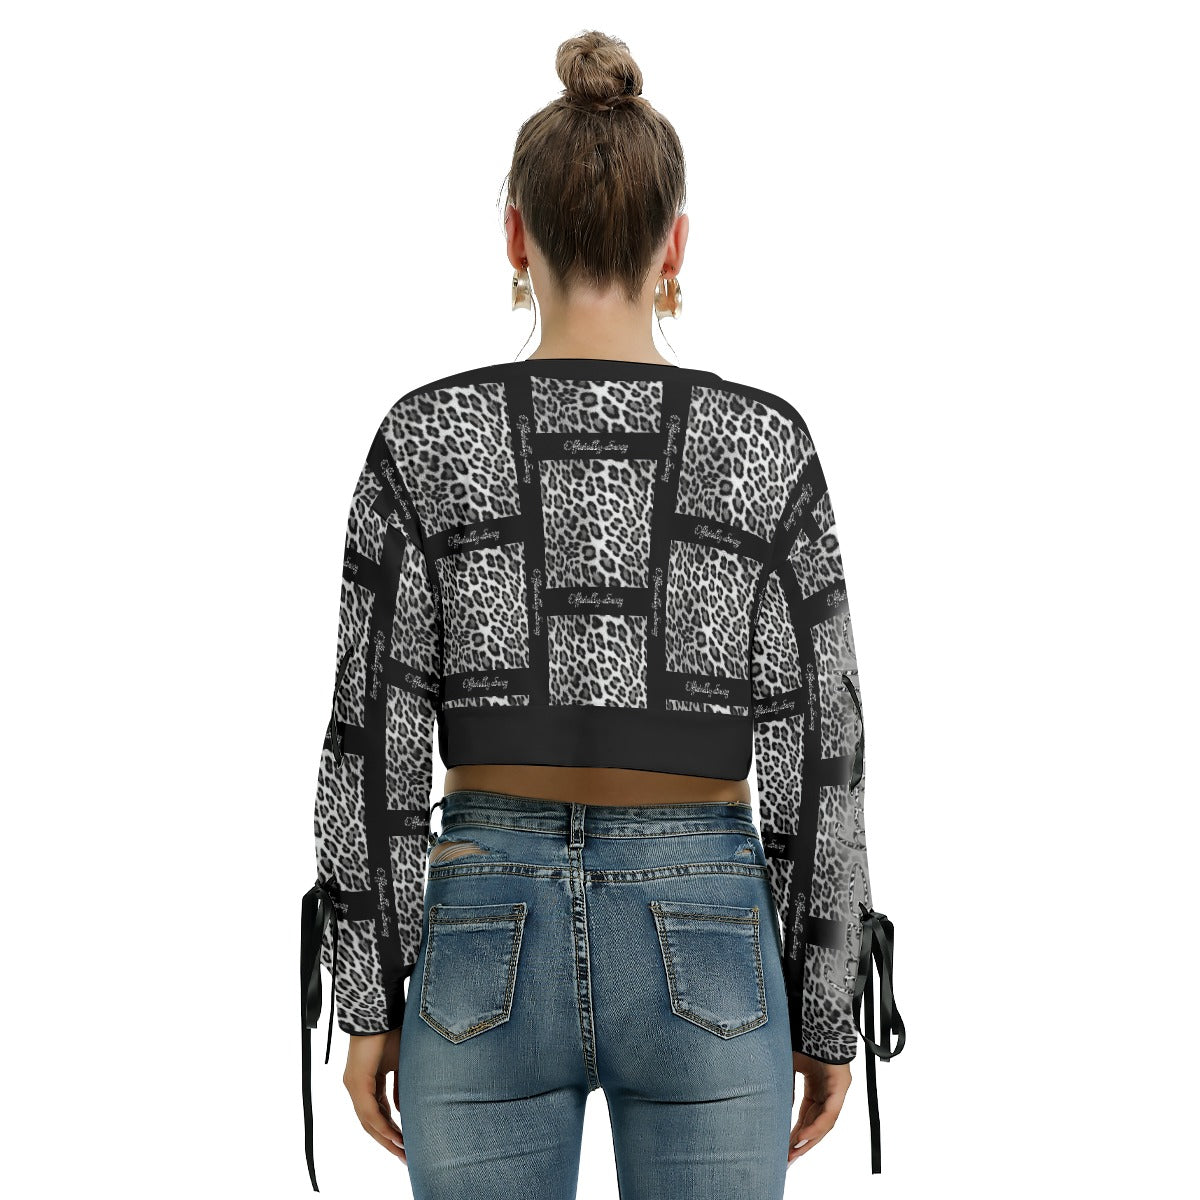 Officially Sexy Snow Leopard Print Collection Women's AOLP Black Pattern Cropped Sweatshirt With Long Lace up Sleeves (English) 3